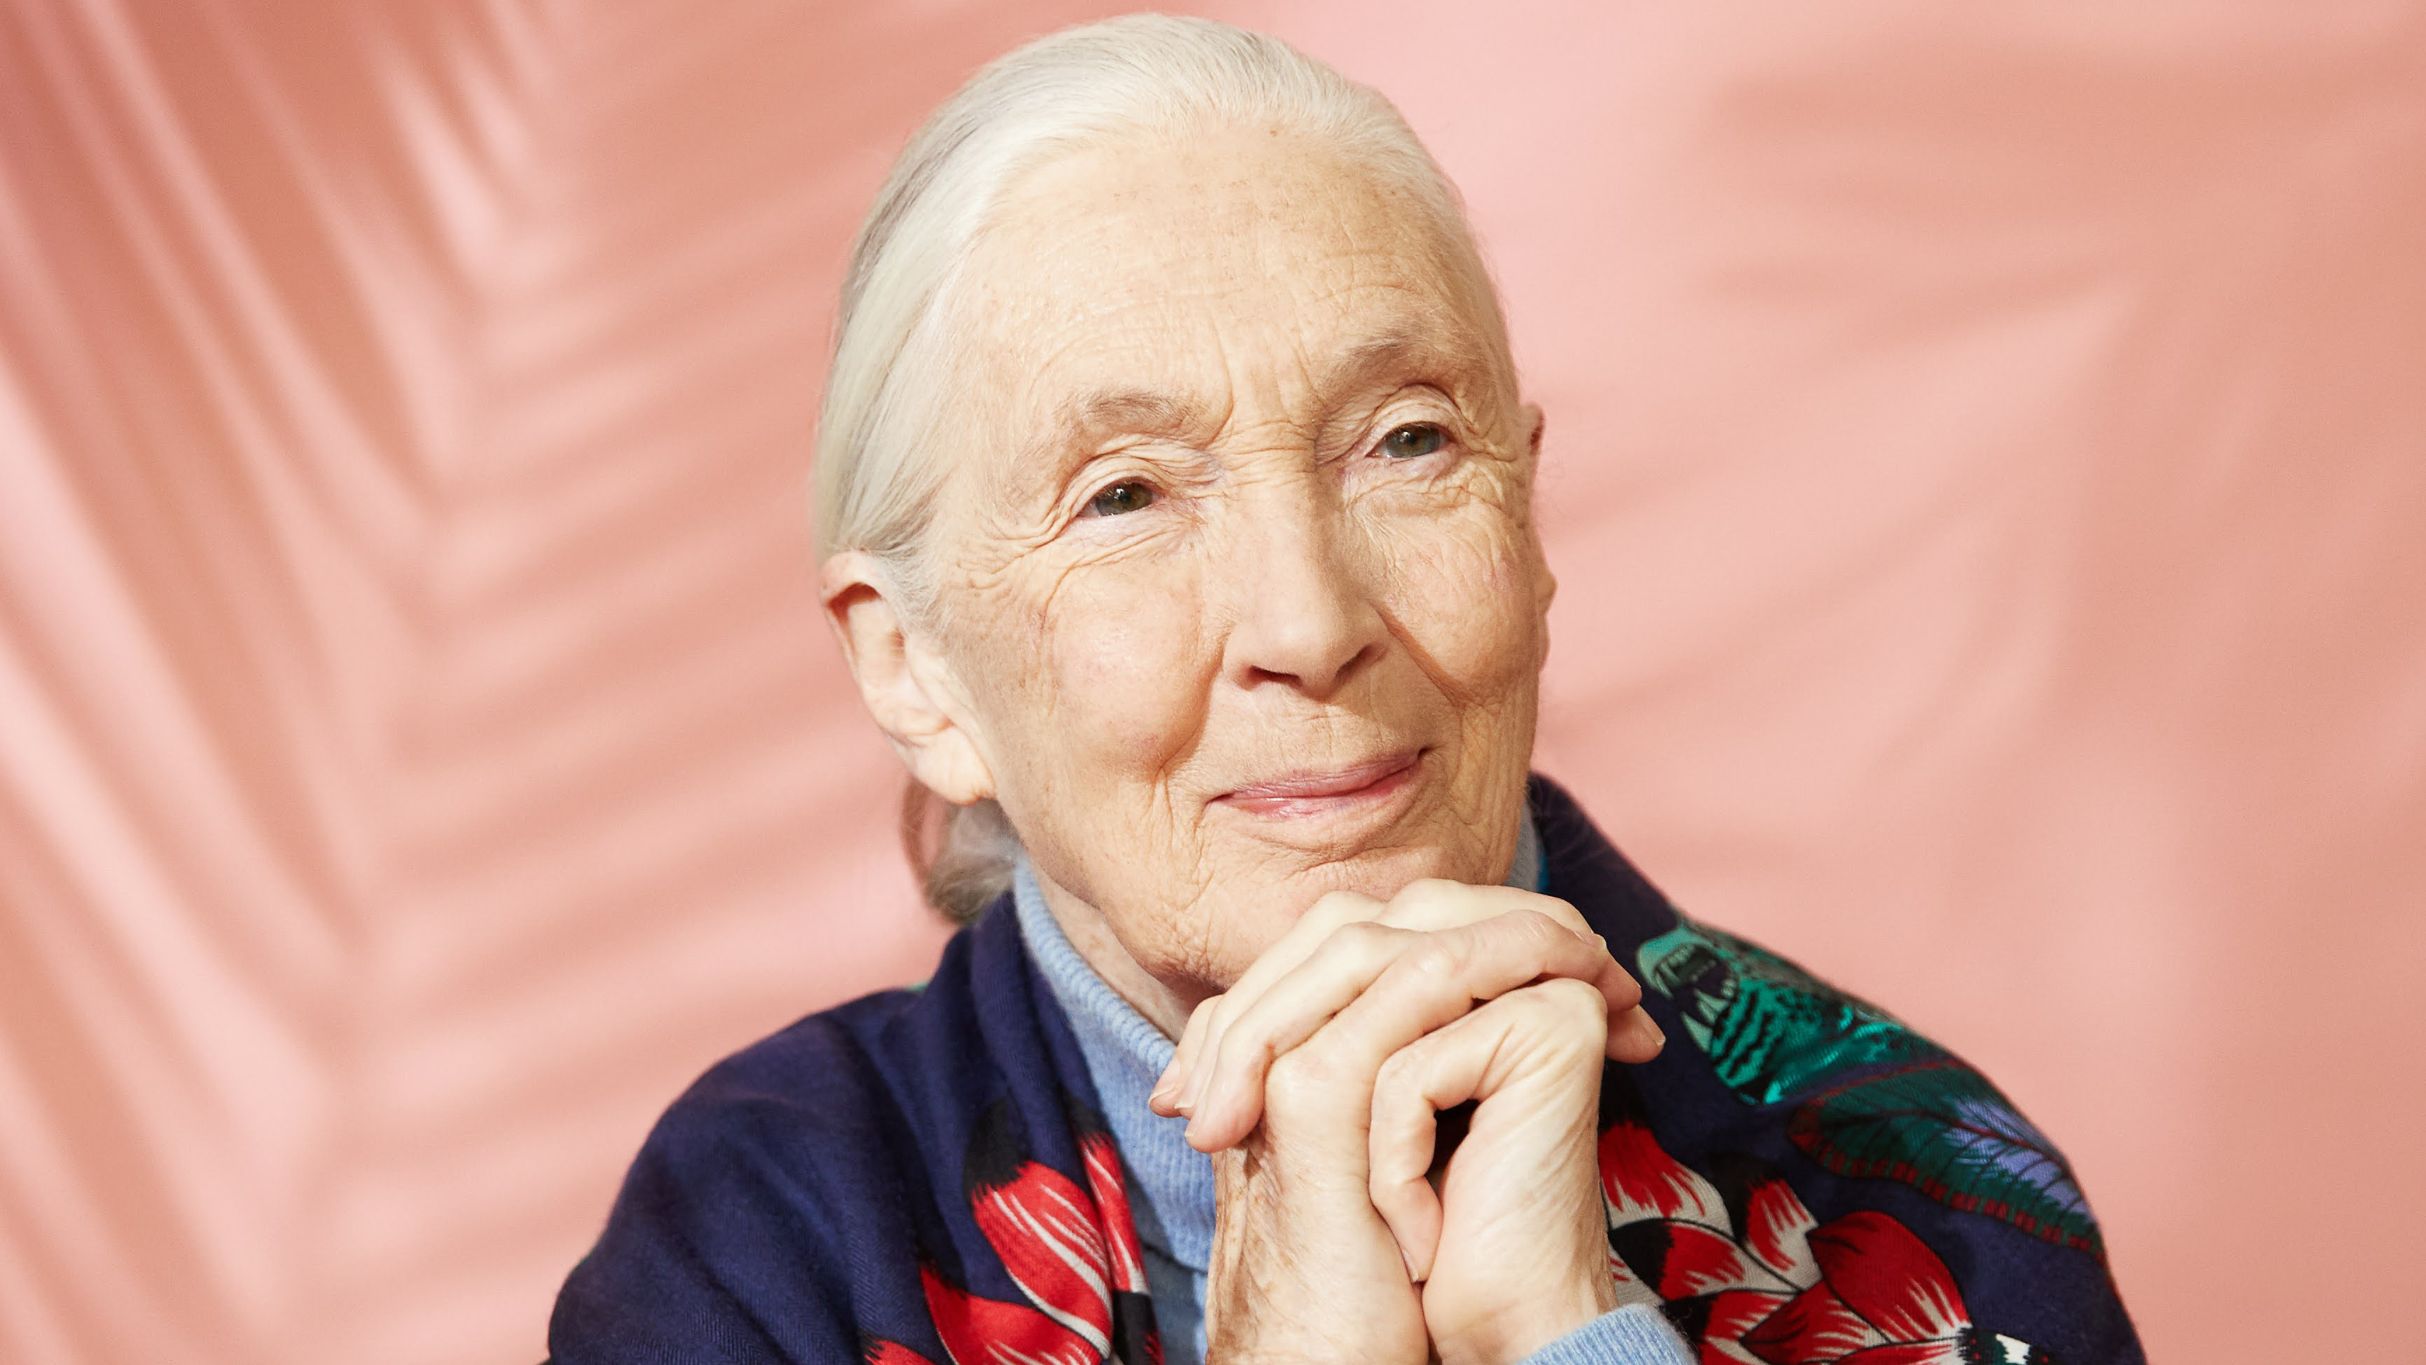 An Evening with Dr. Jane Goodall